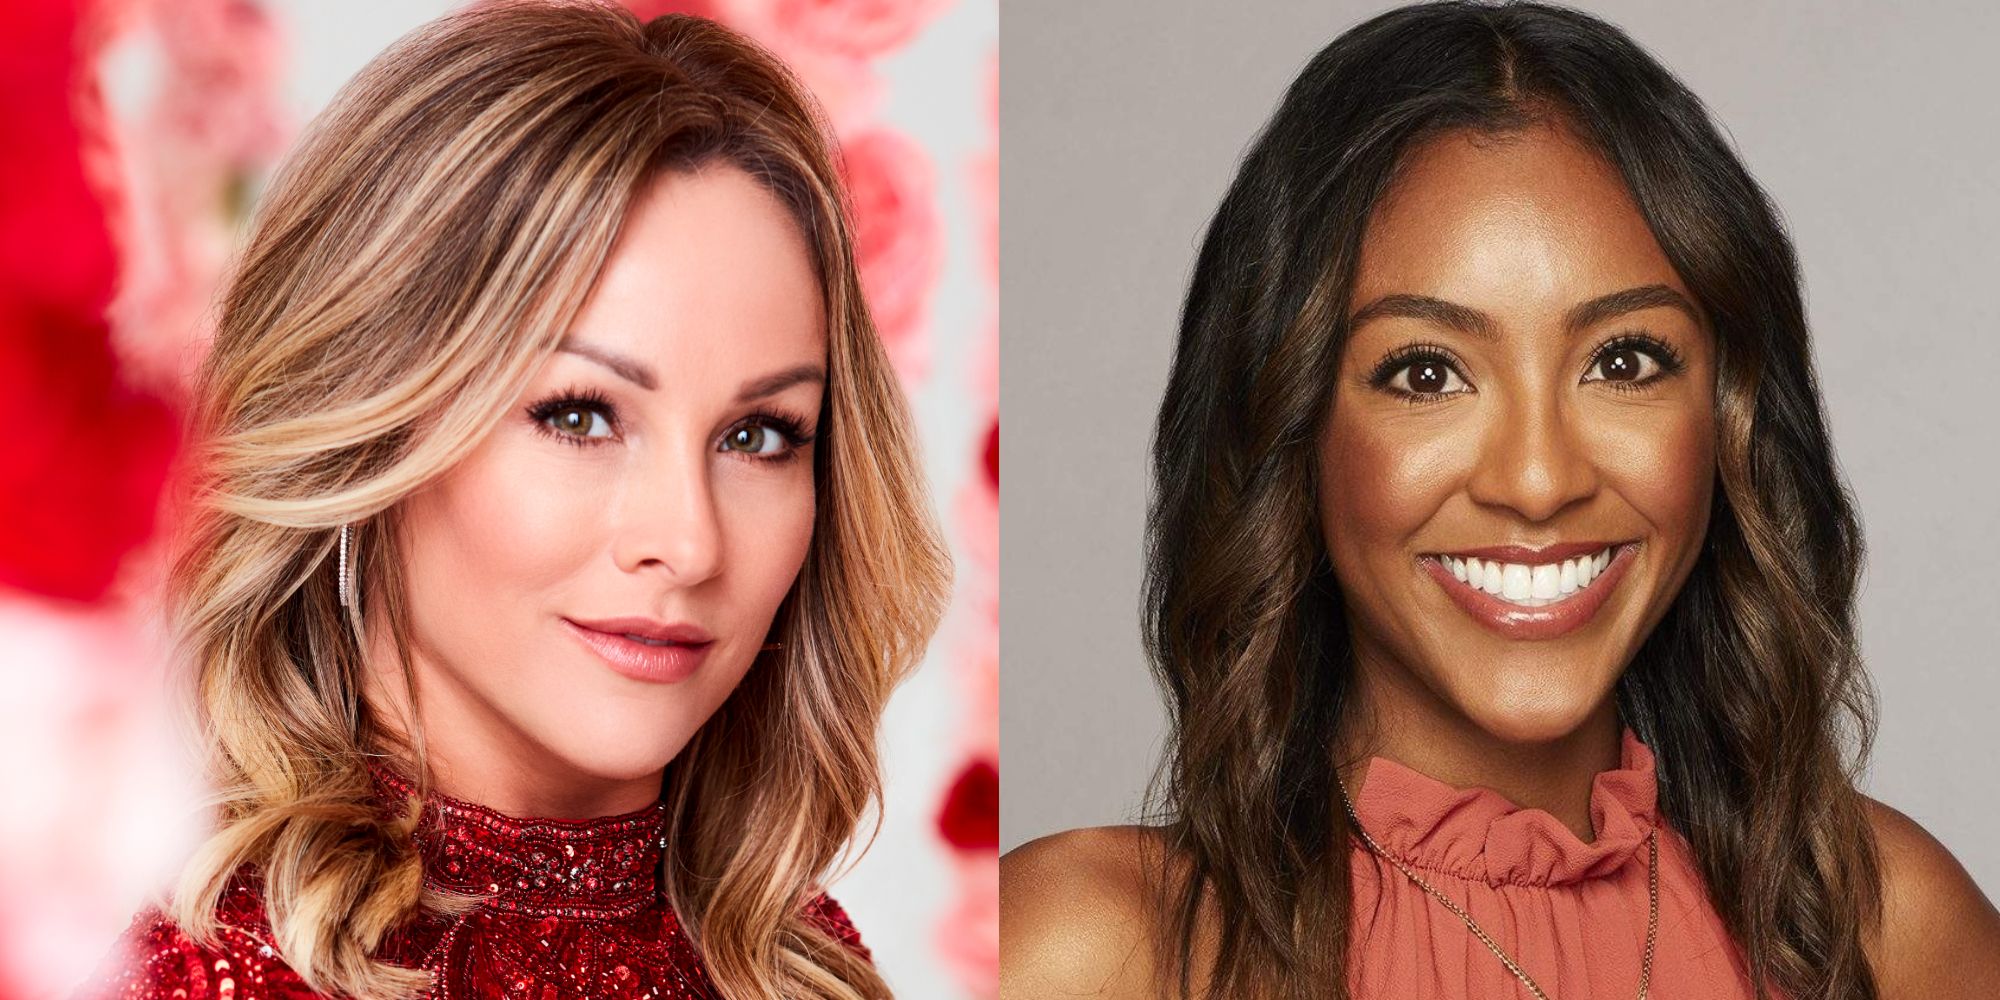 Clare Crawley and Tayshia Adams from The Bachelorette